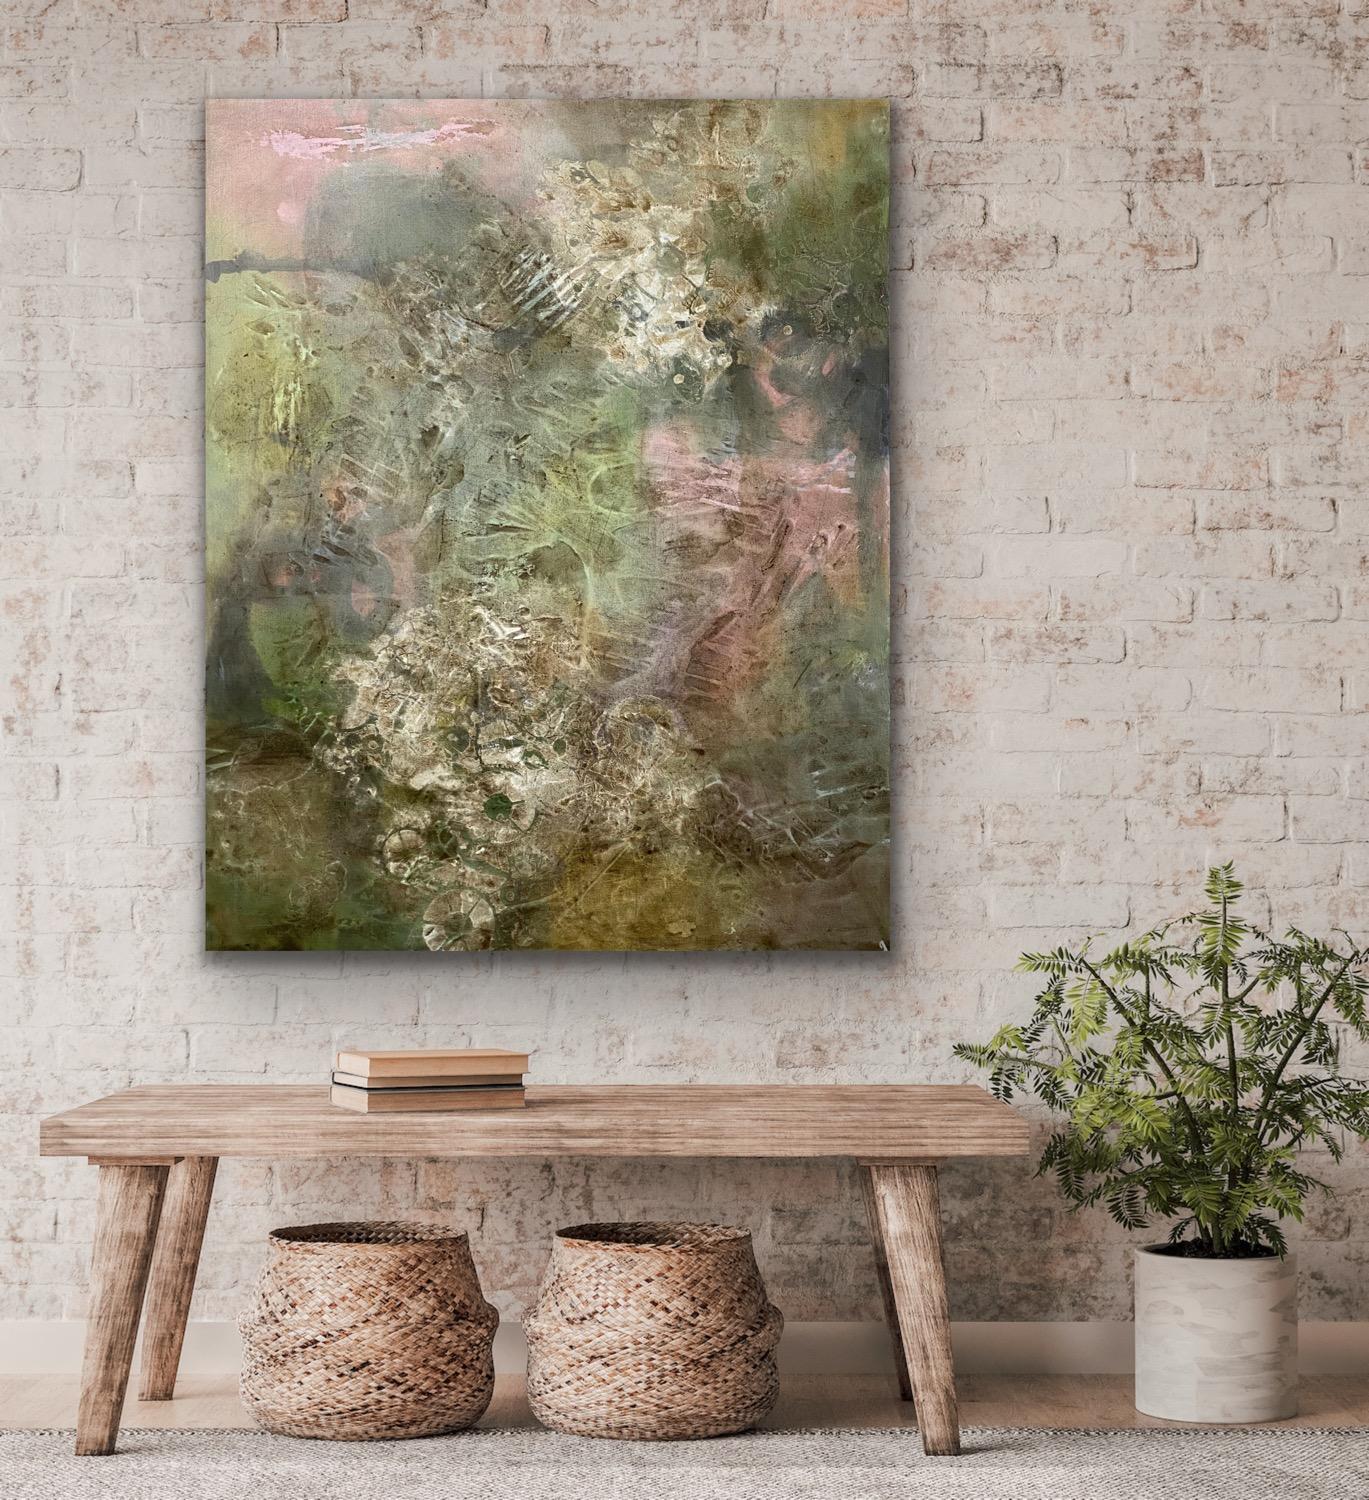 “Earth’s foliage” 60 x 48 inches is a one-of-a-kind original, modern, contemporary abstract painting by Juanita Bellavance.  In this highly expressive abstract work, Juanita combined earthy brown tones with floral pinks and whites.  In the